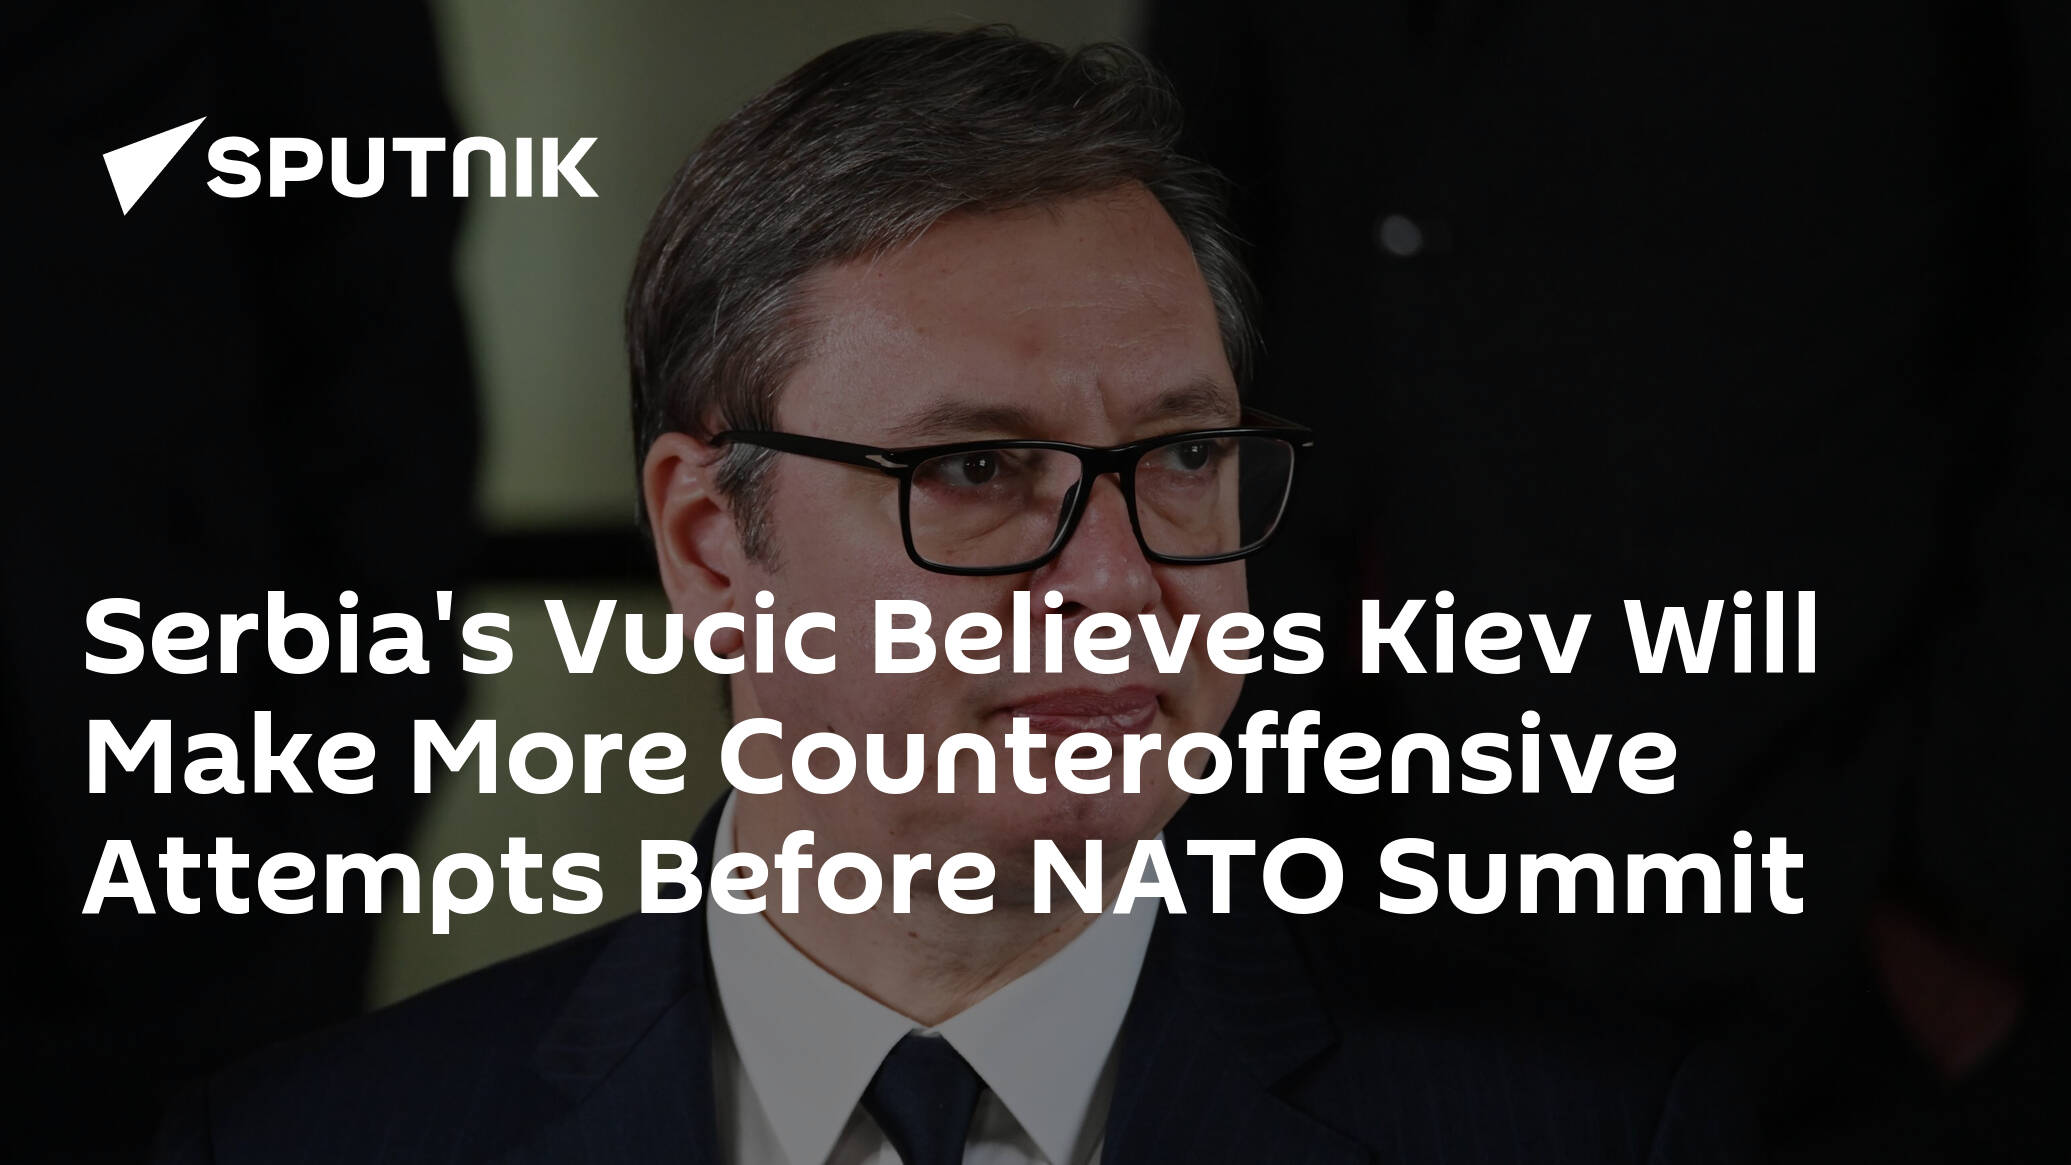 Serbia's Vucic Believes Kiev Will Make More Counteroffensive Attempts Before NATO Summit